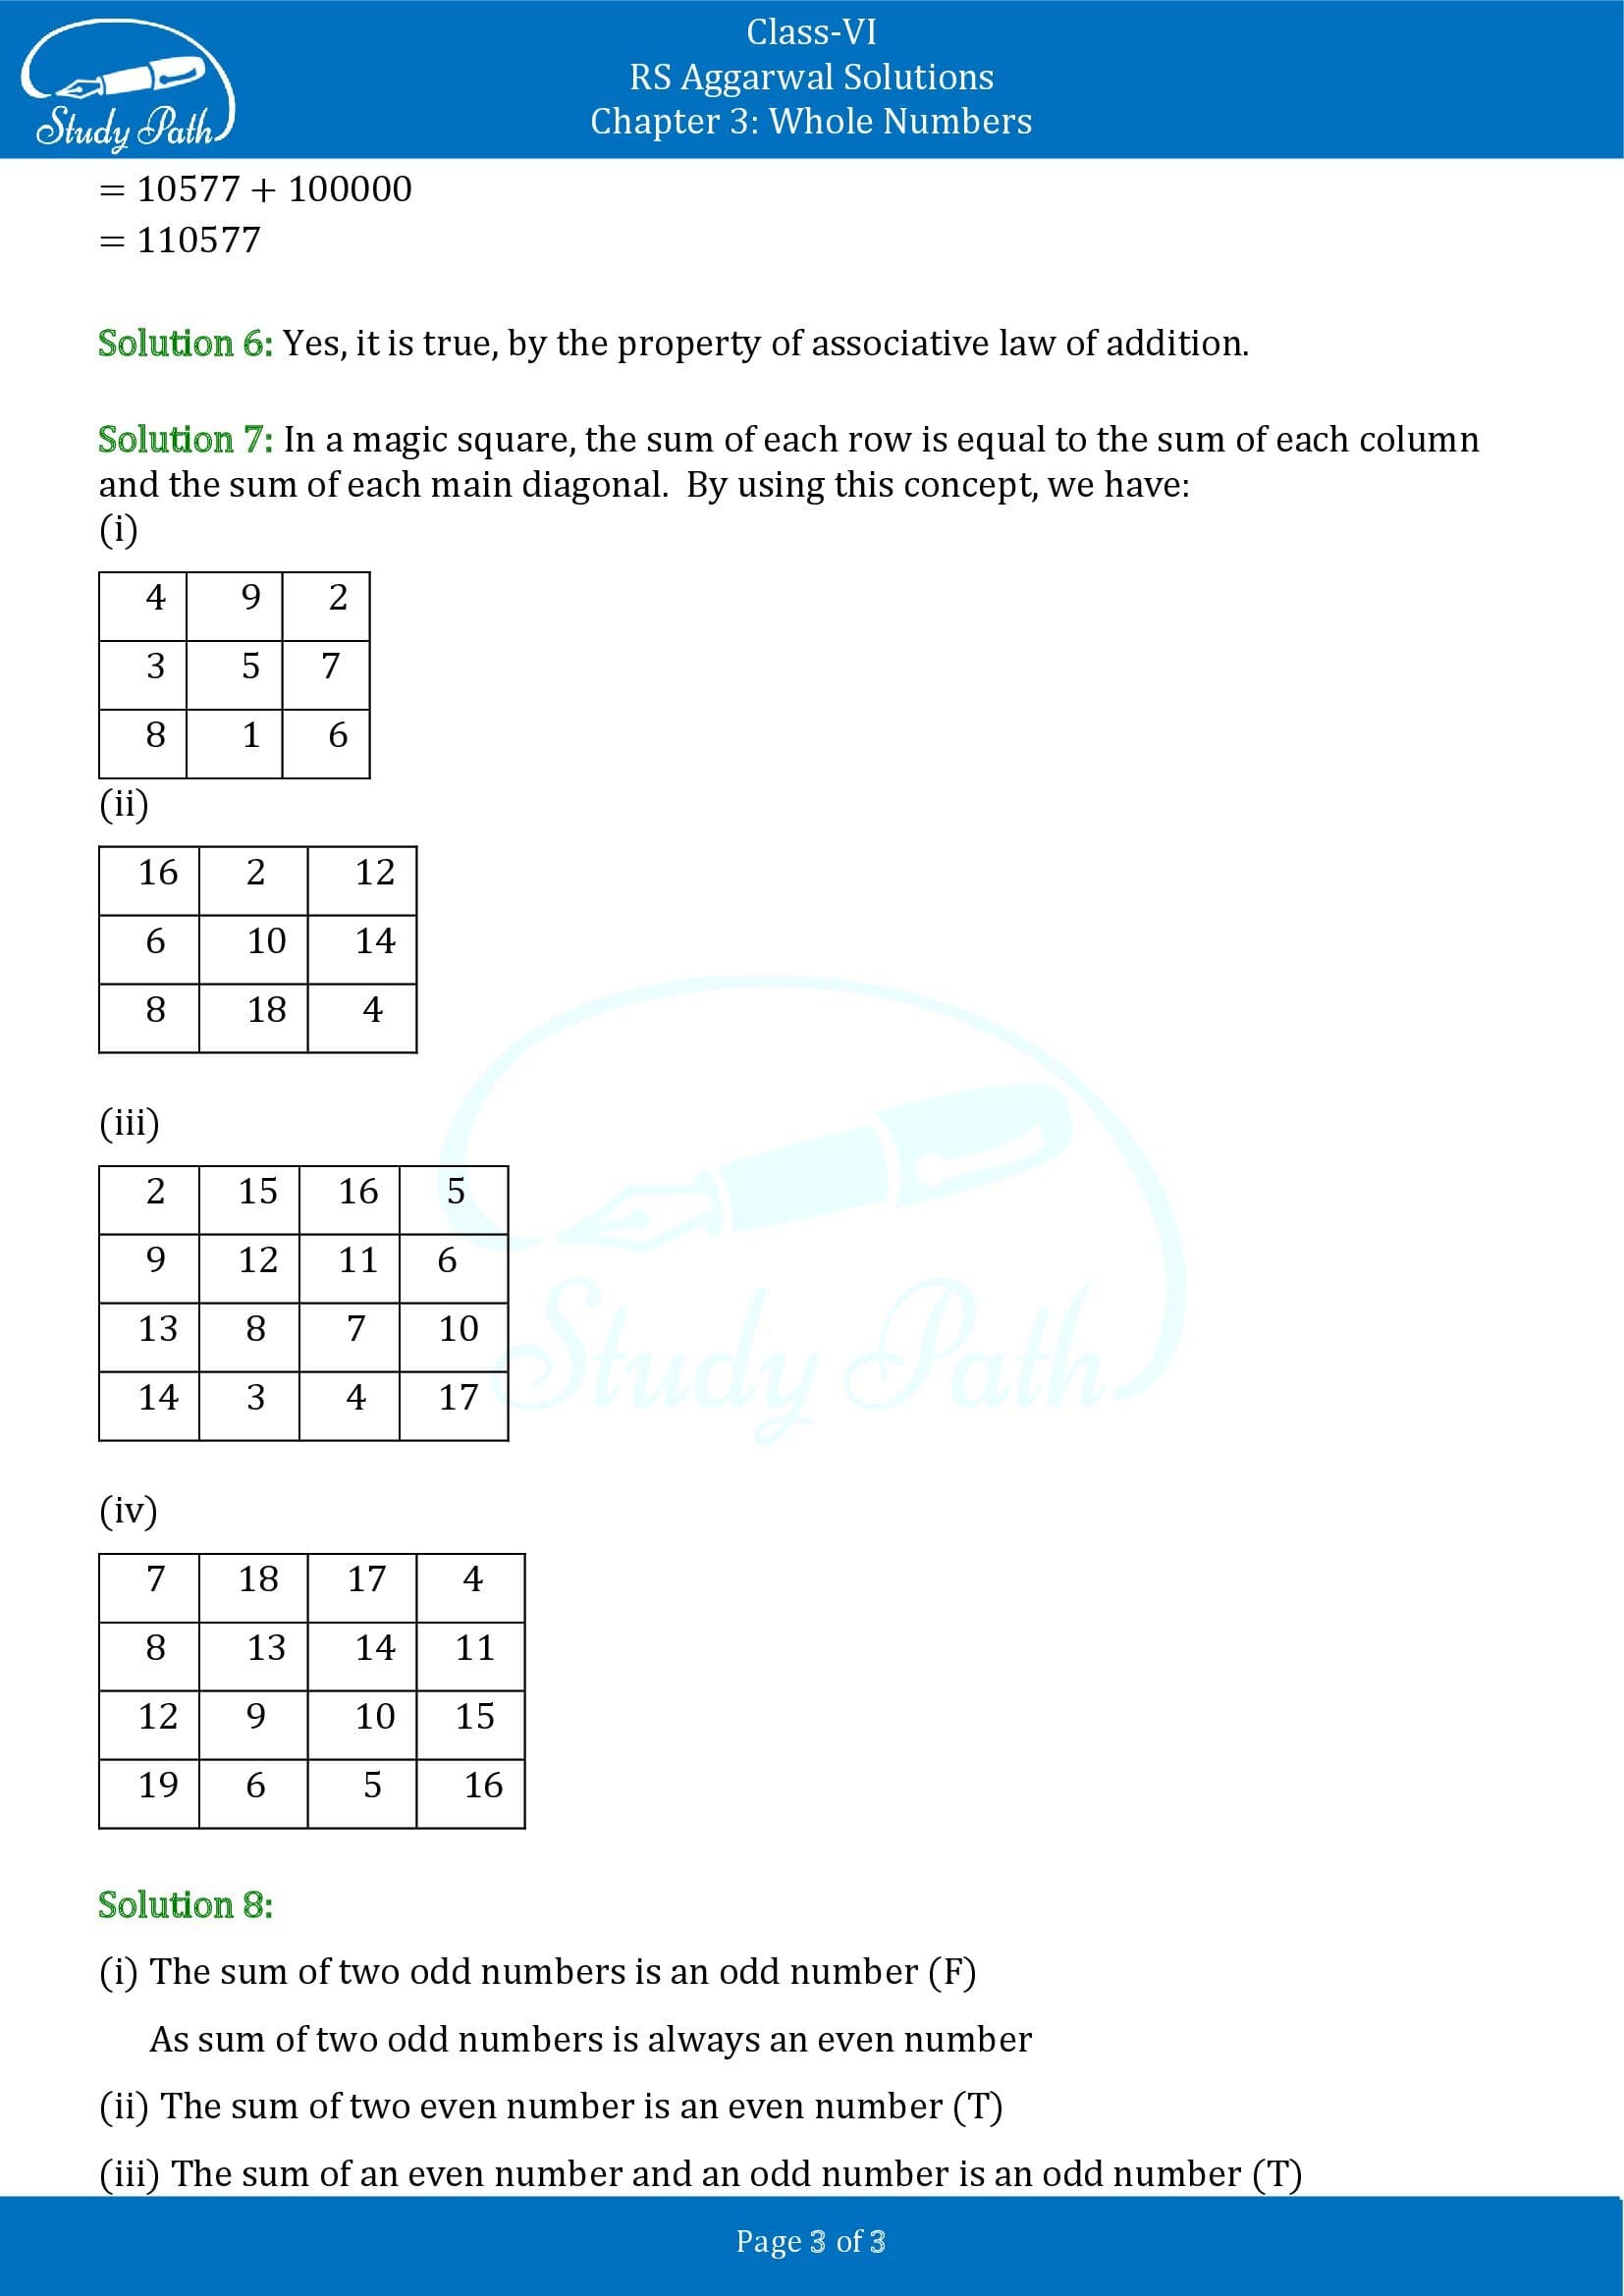 RS Aggarwal Solutions Class 6 Chapter 3 Whole Numbers Exercise 3B 00003